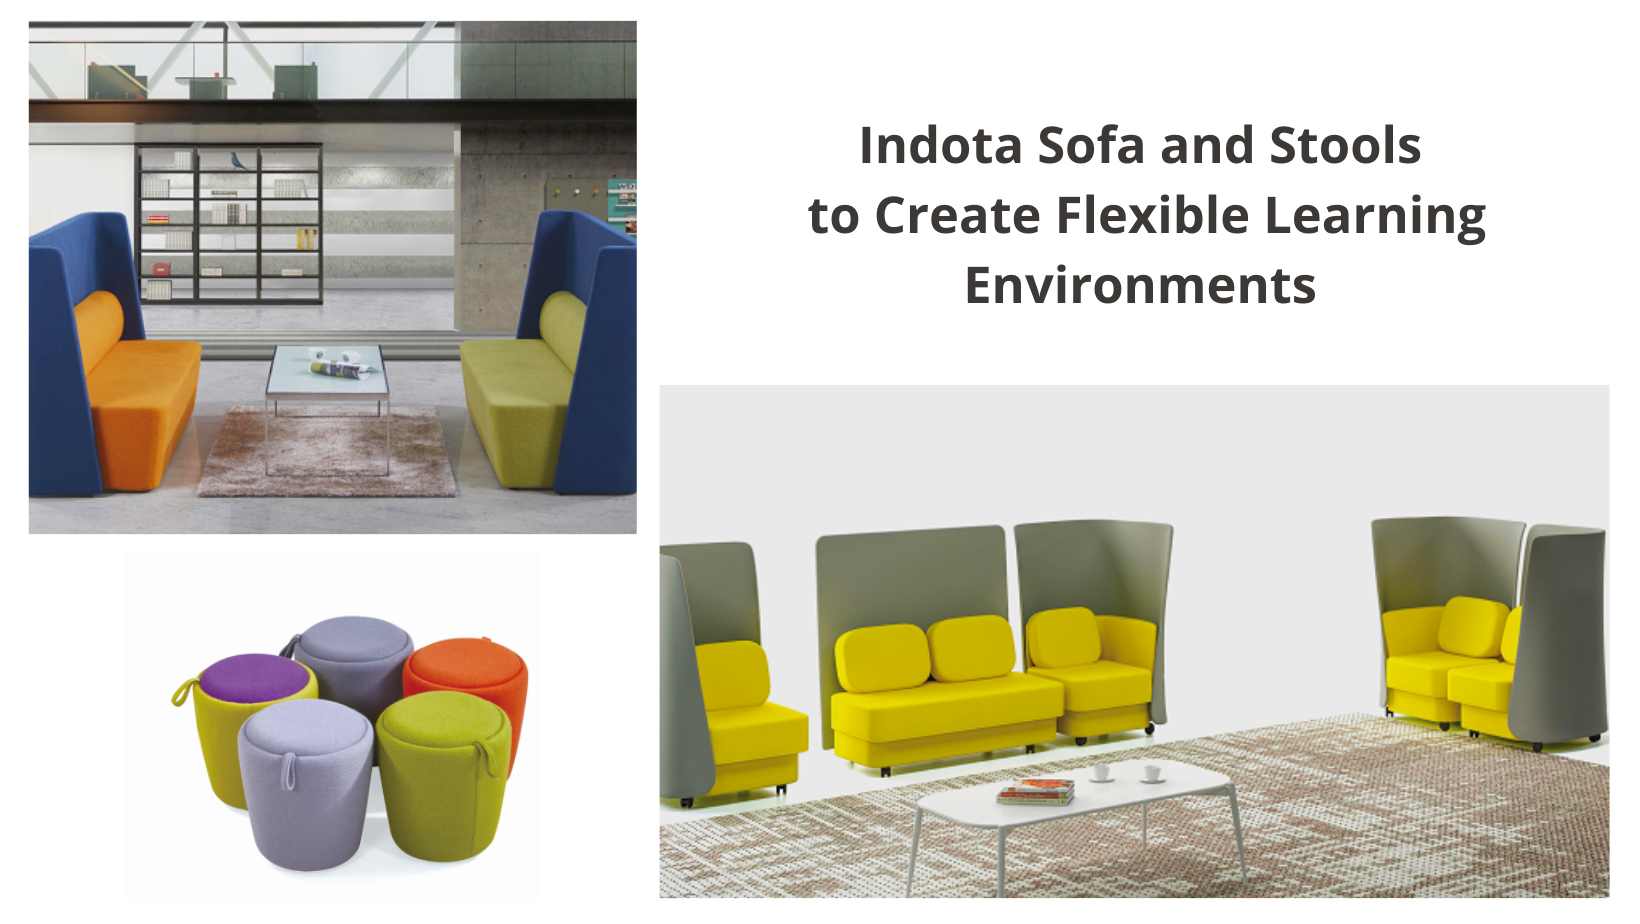 indota sofa and stools for flexible learning